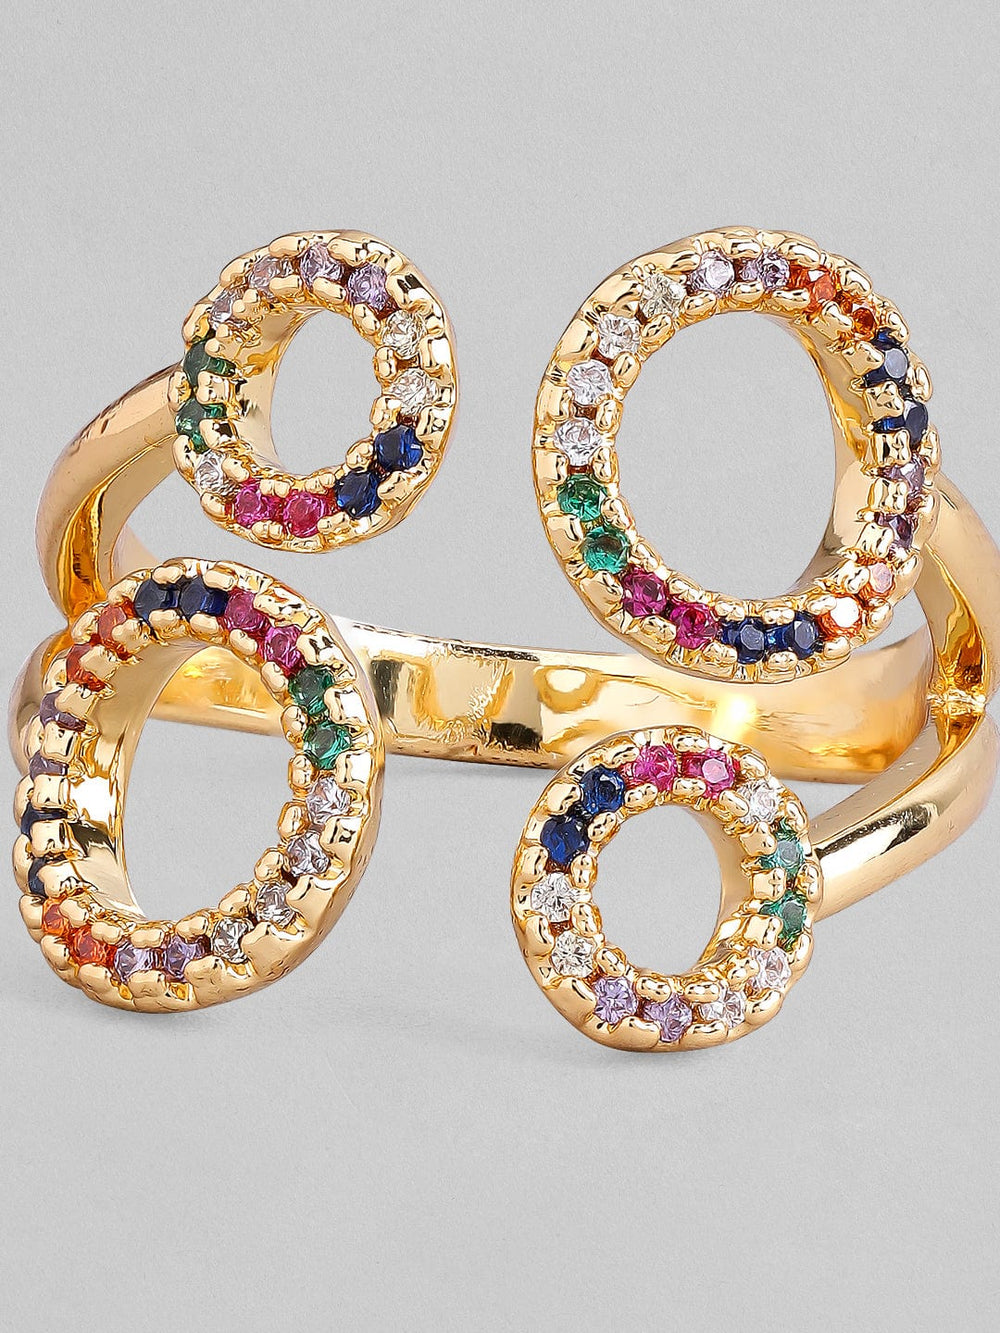 Rubans Voguish 18K Gold Plated Stainless Steel Waterproof With Multicoloured Zircons Contemporary Ring. Rings